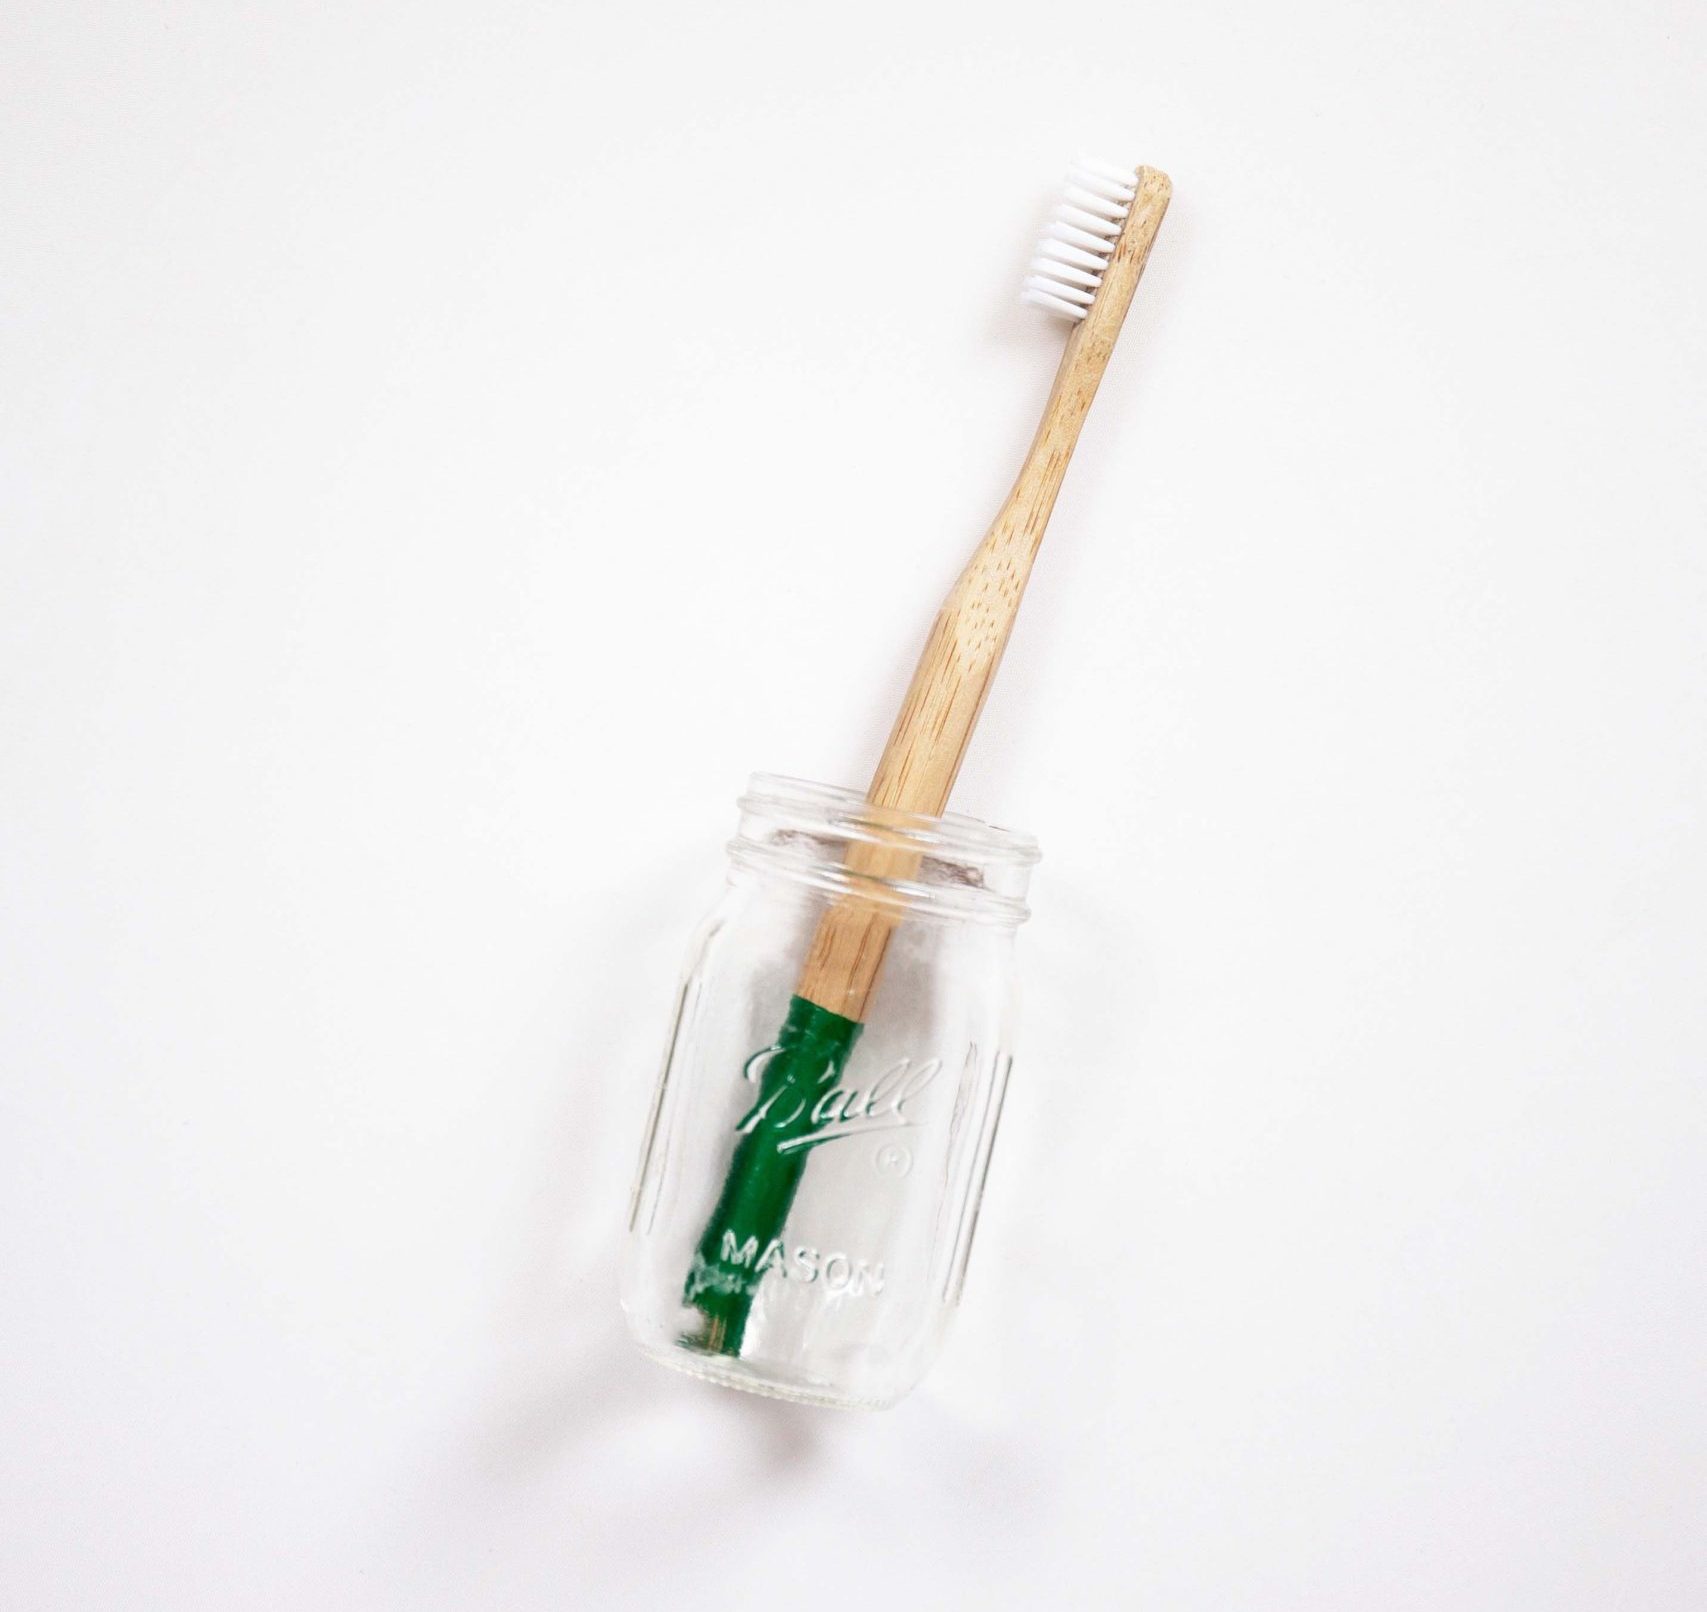 Wood toothbrush in mason jar with green tape